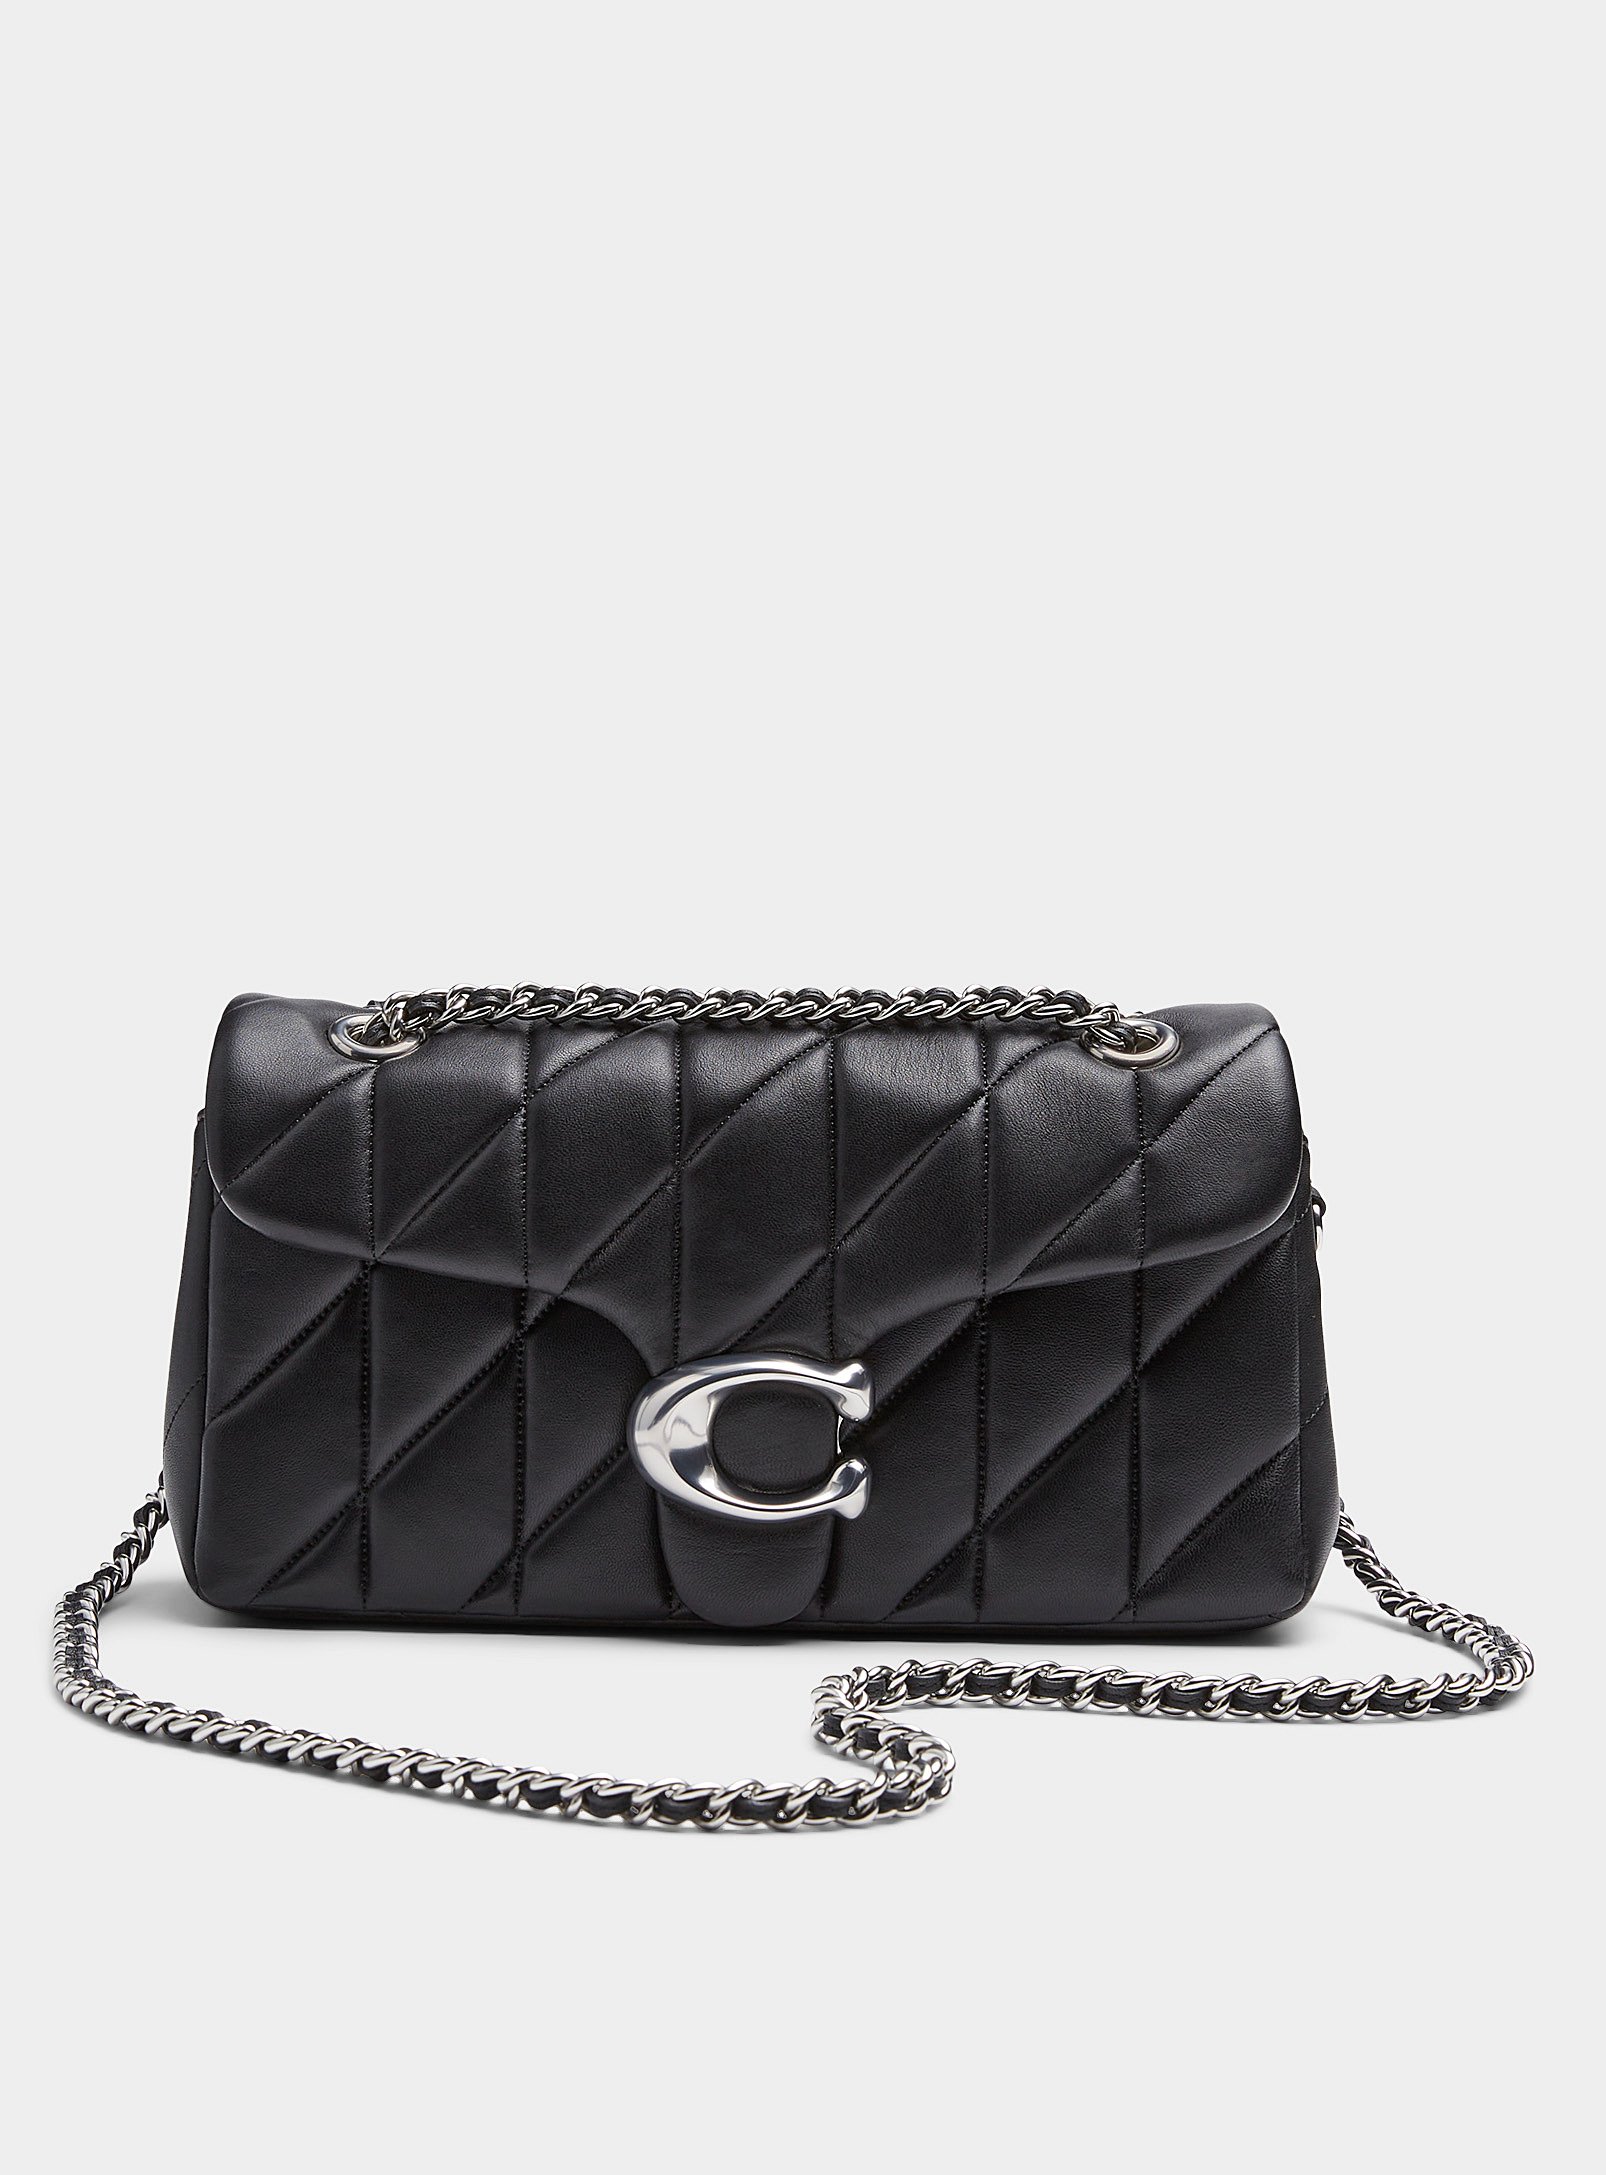 Coach Tabby Quilted Leather Flap Bag In Black